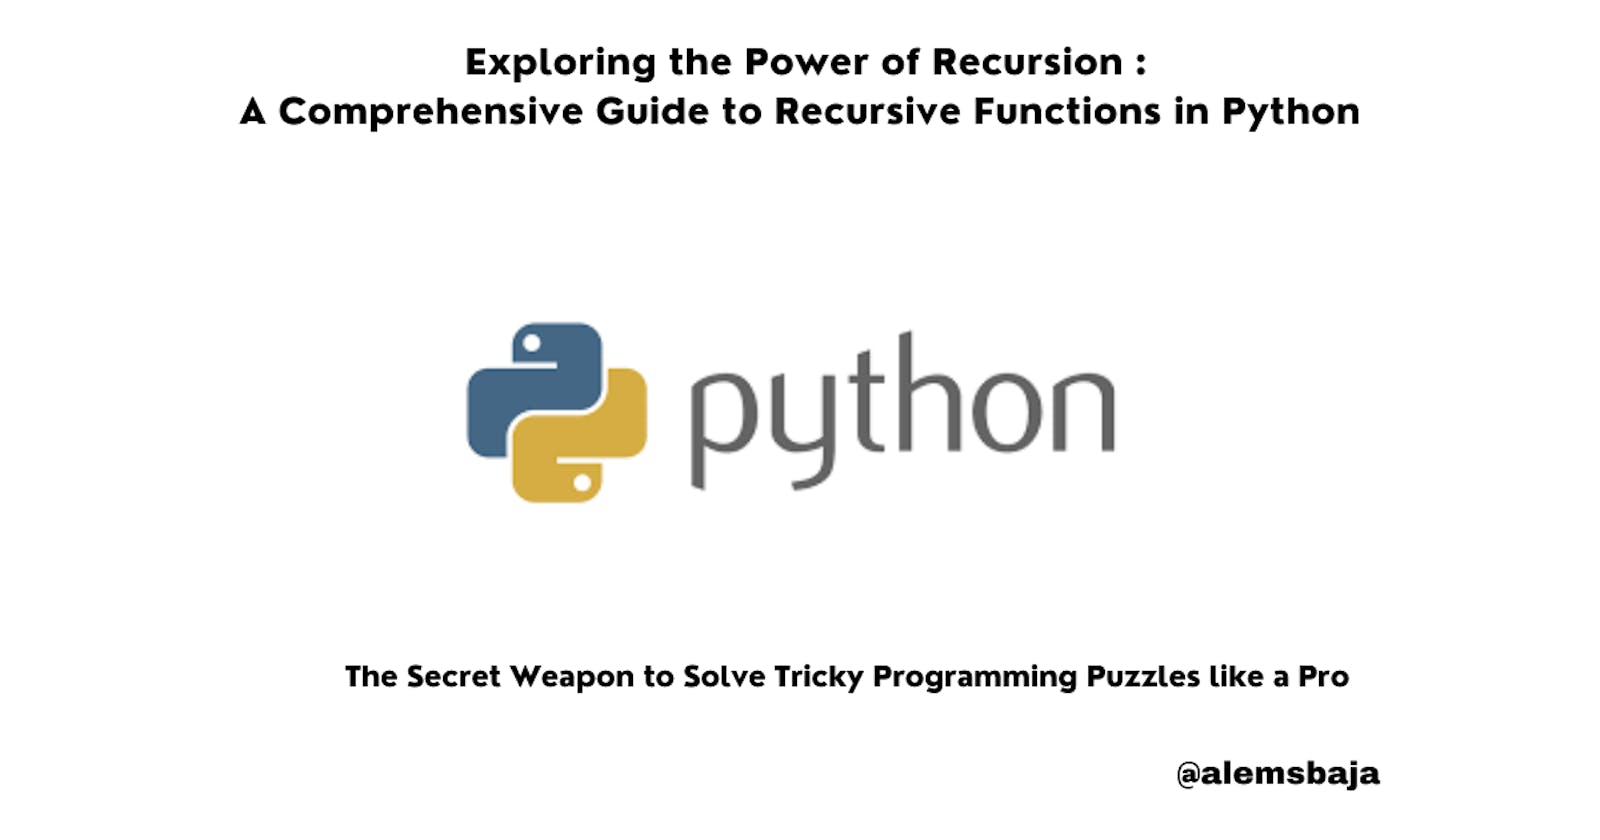 Exploring the Power of Recursion : A Comprehensive Guide to Recursive Functions in Python